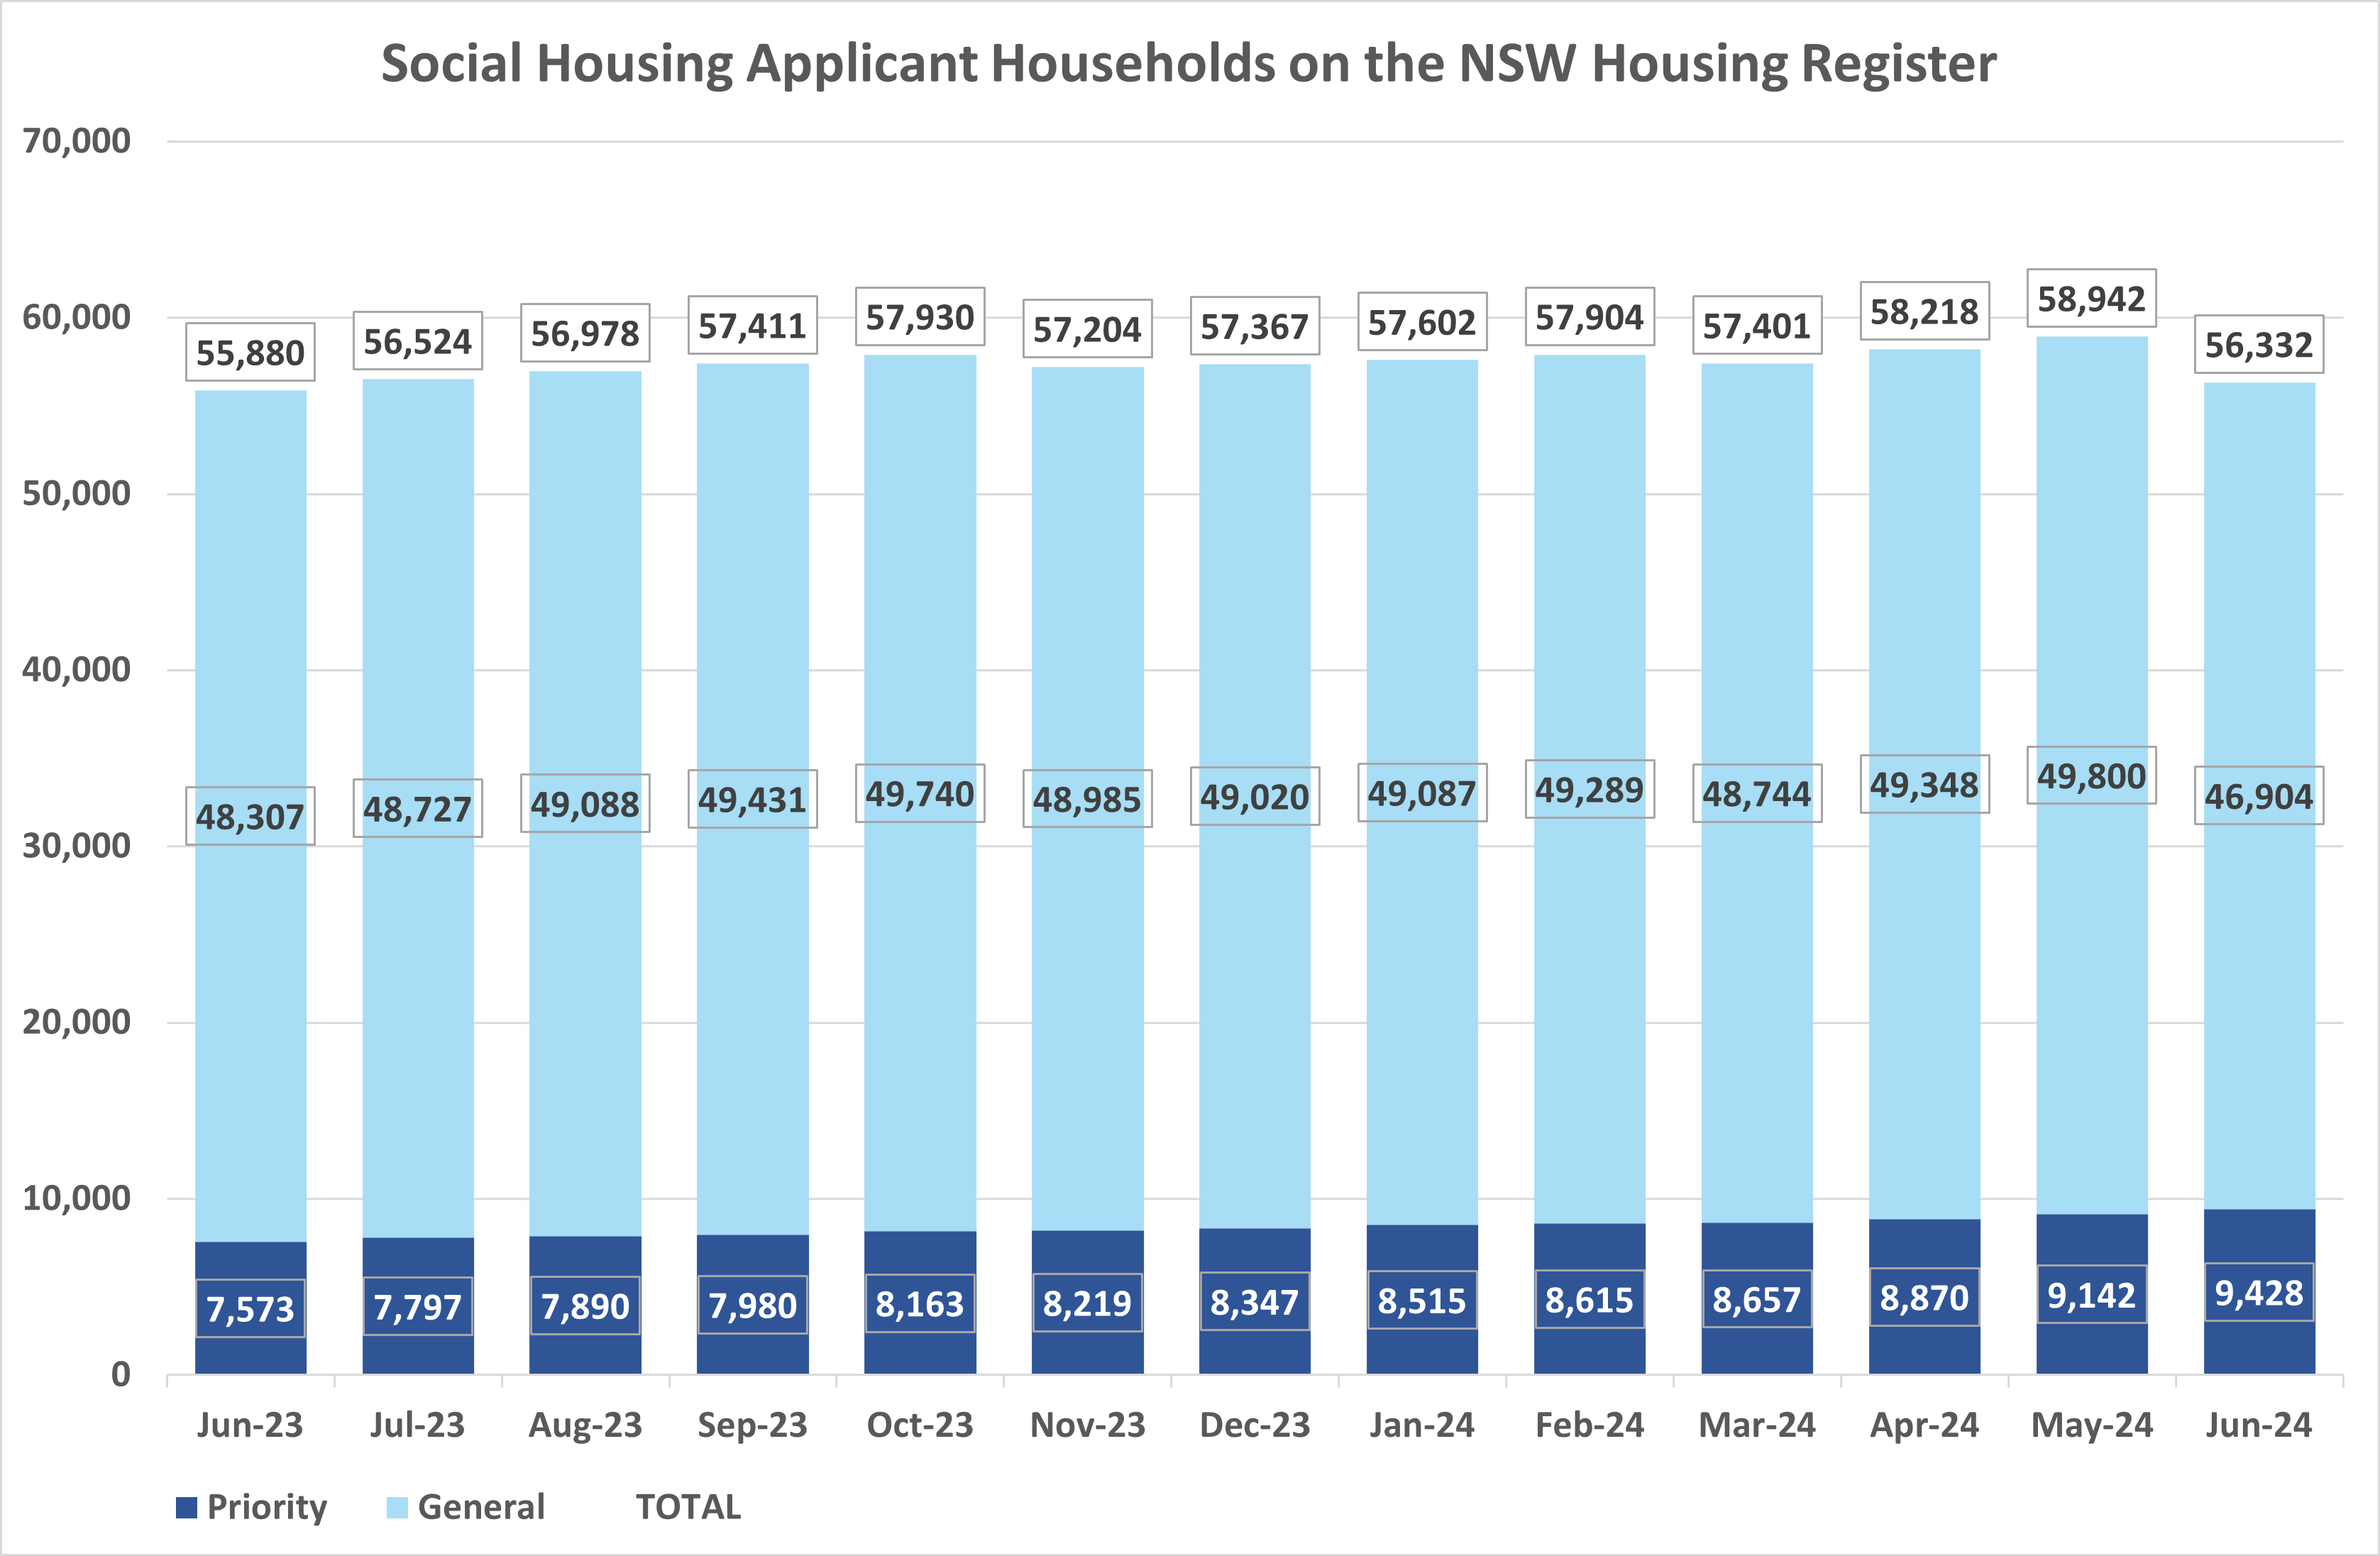 Bar graph showing the number of priority and general applicant households on the NSW Housing Register